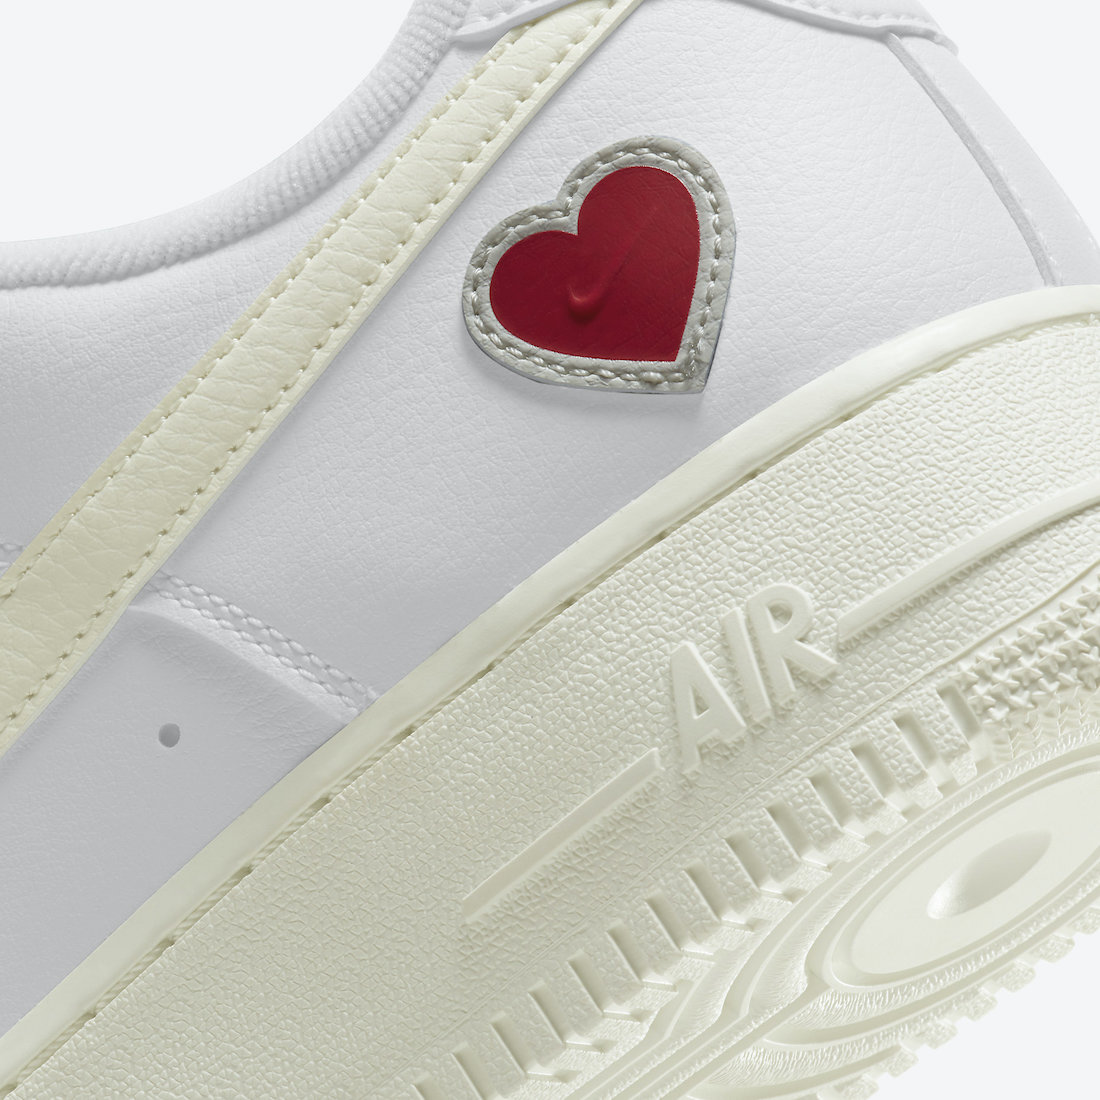 Nike Air Force 1 Valentines Day DD7117-100 Release Date